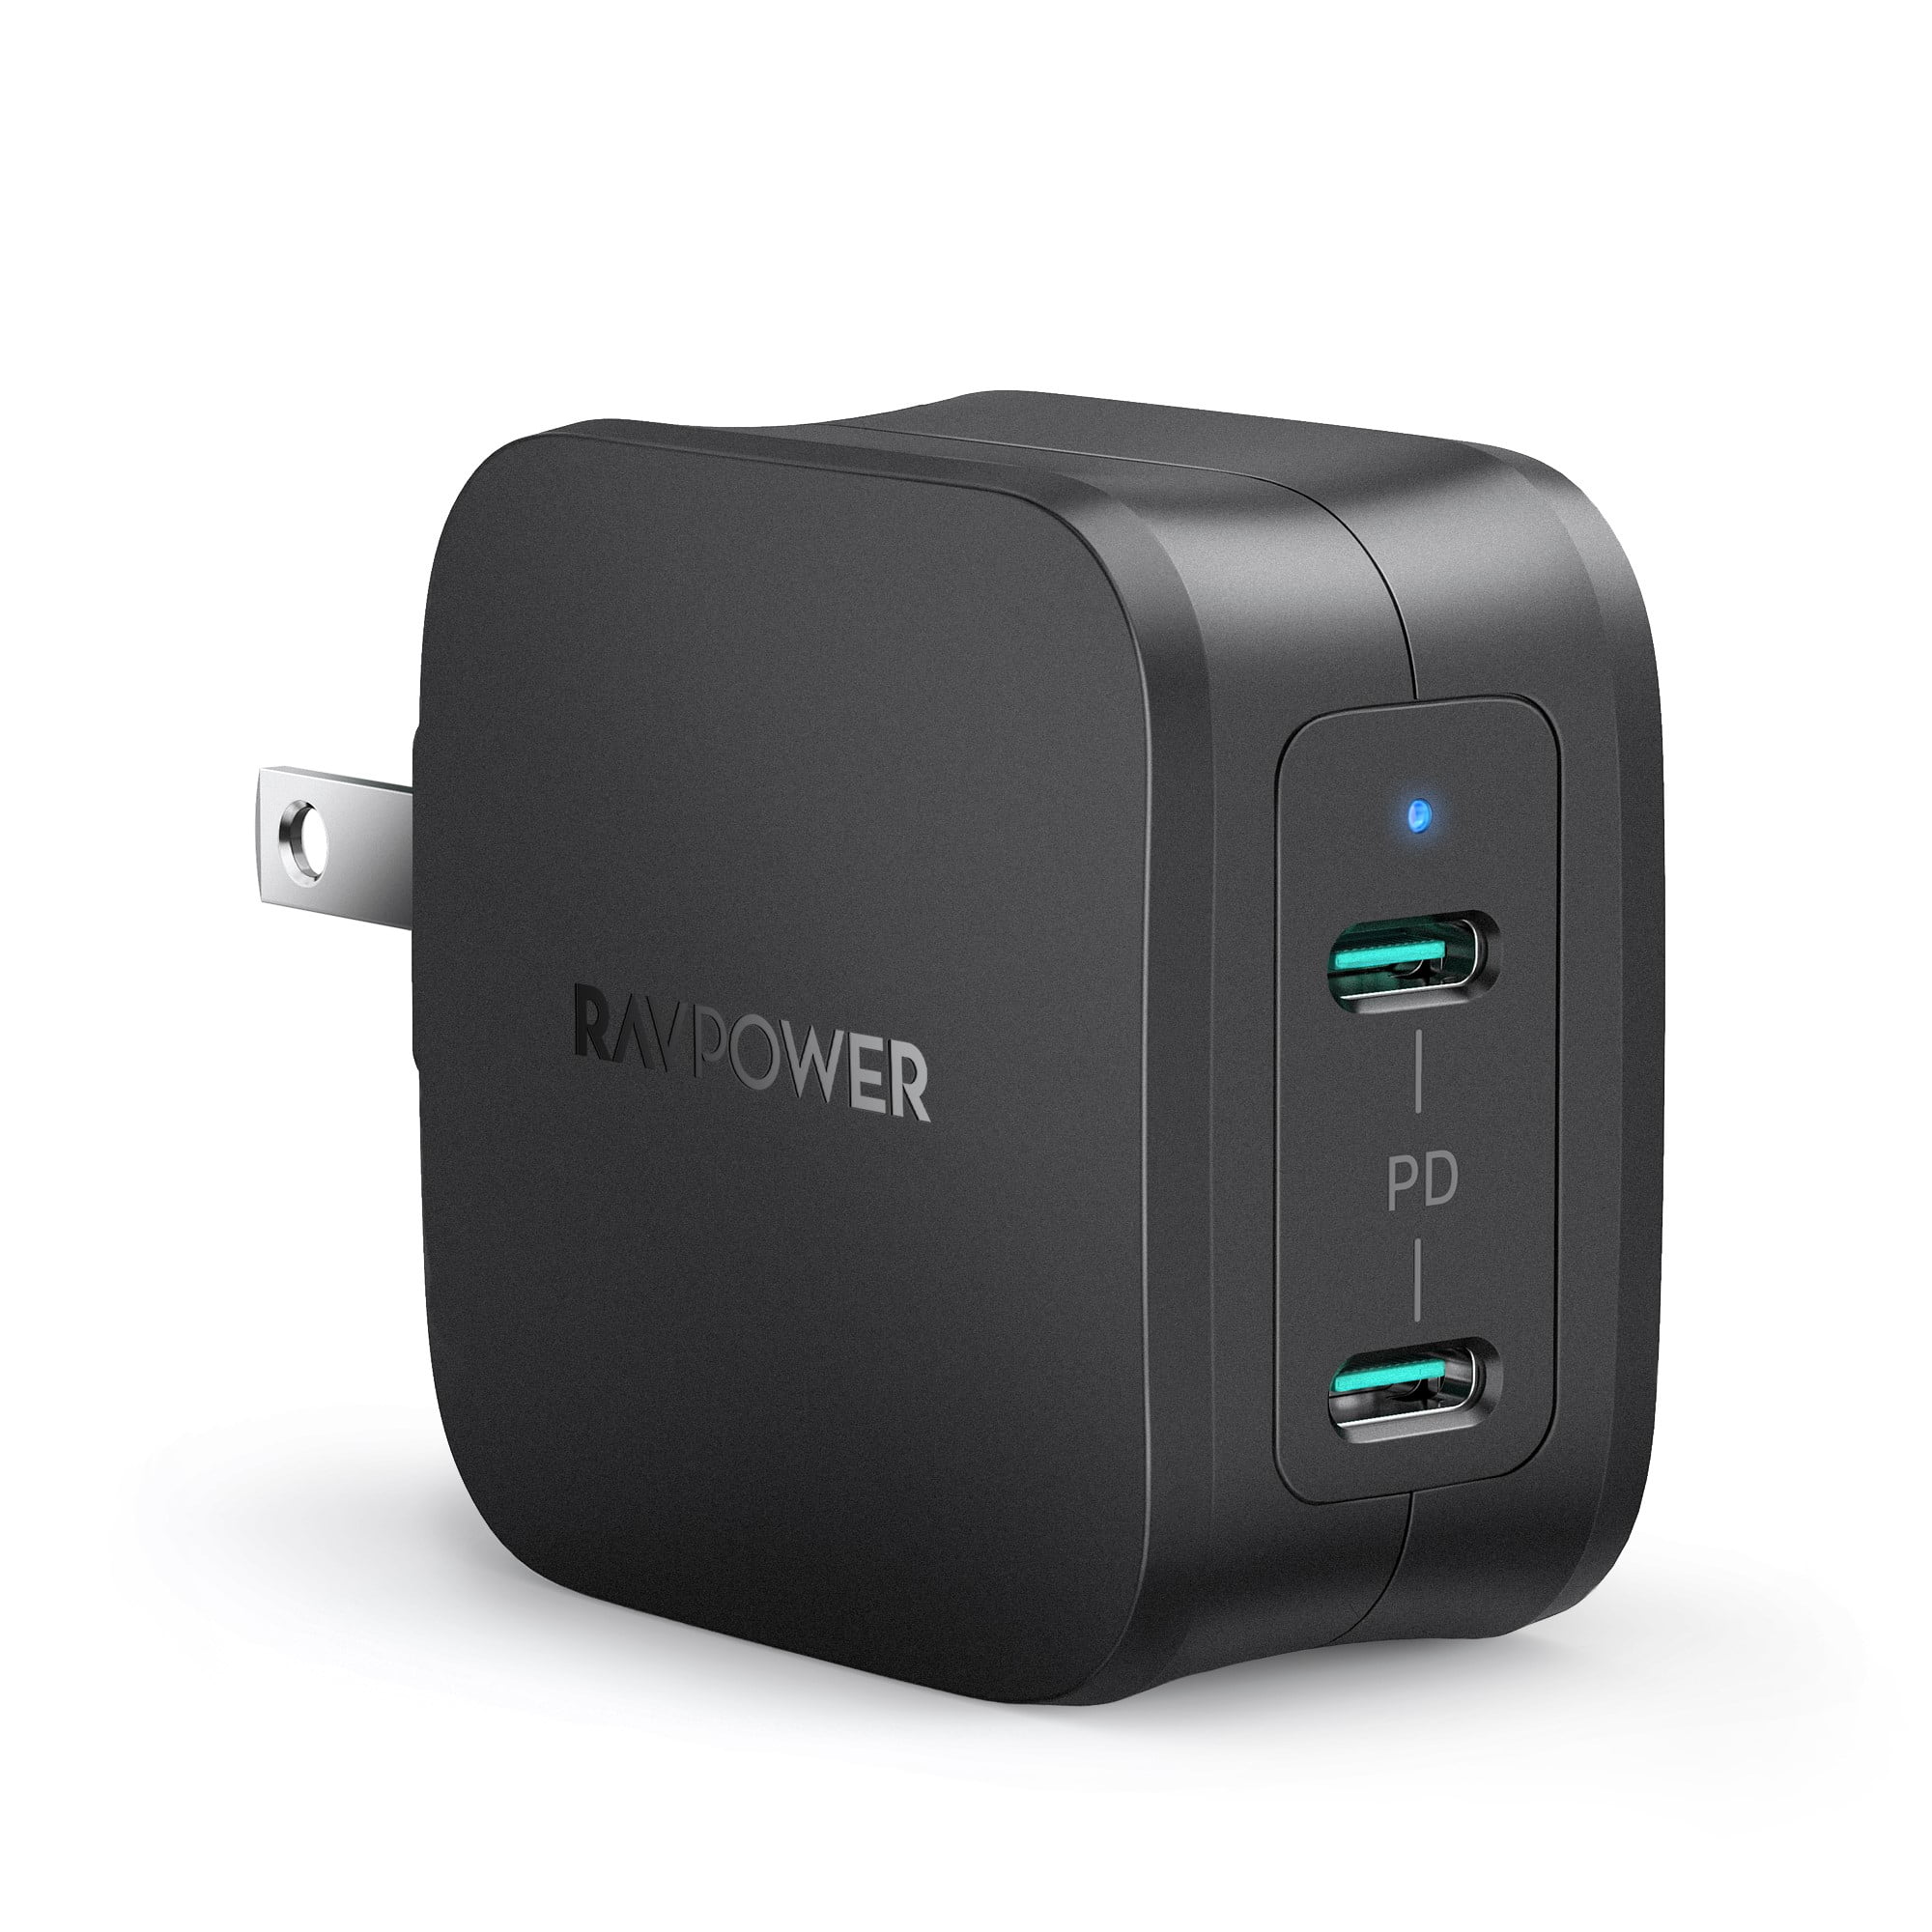 RAVPower USB-C Wall Charger, Dual Port PD Type-C Charger, Black - Walmart.com